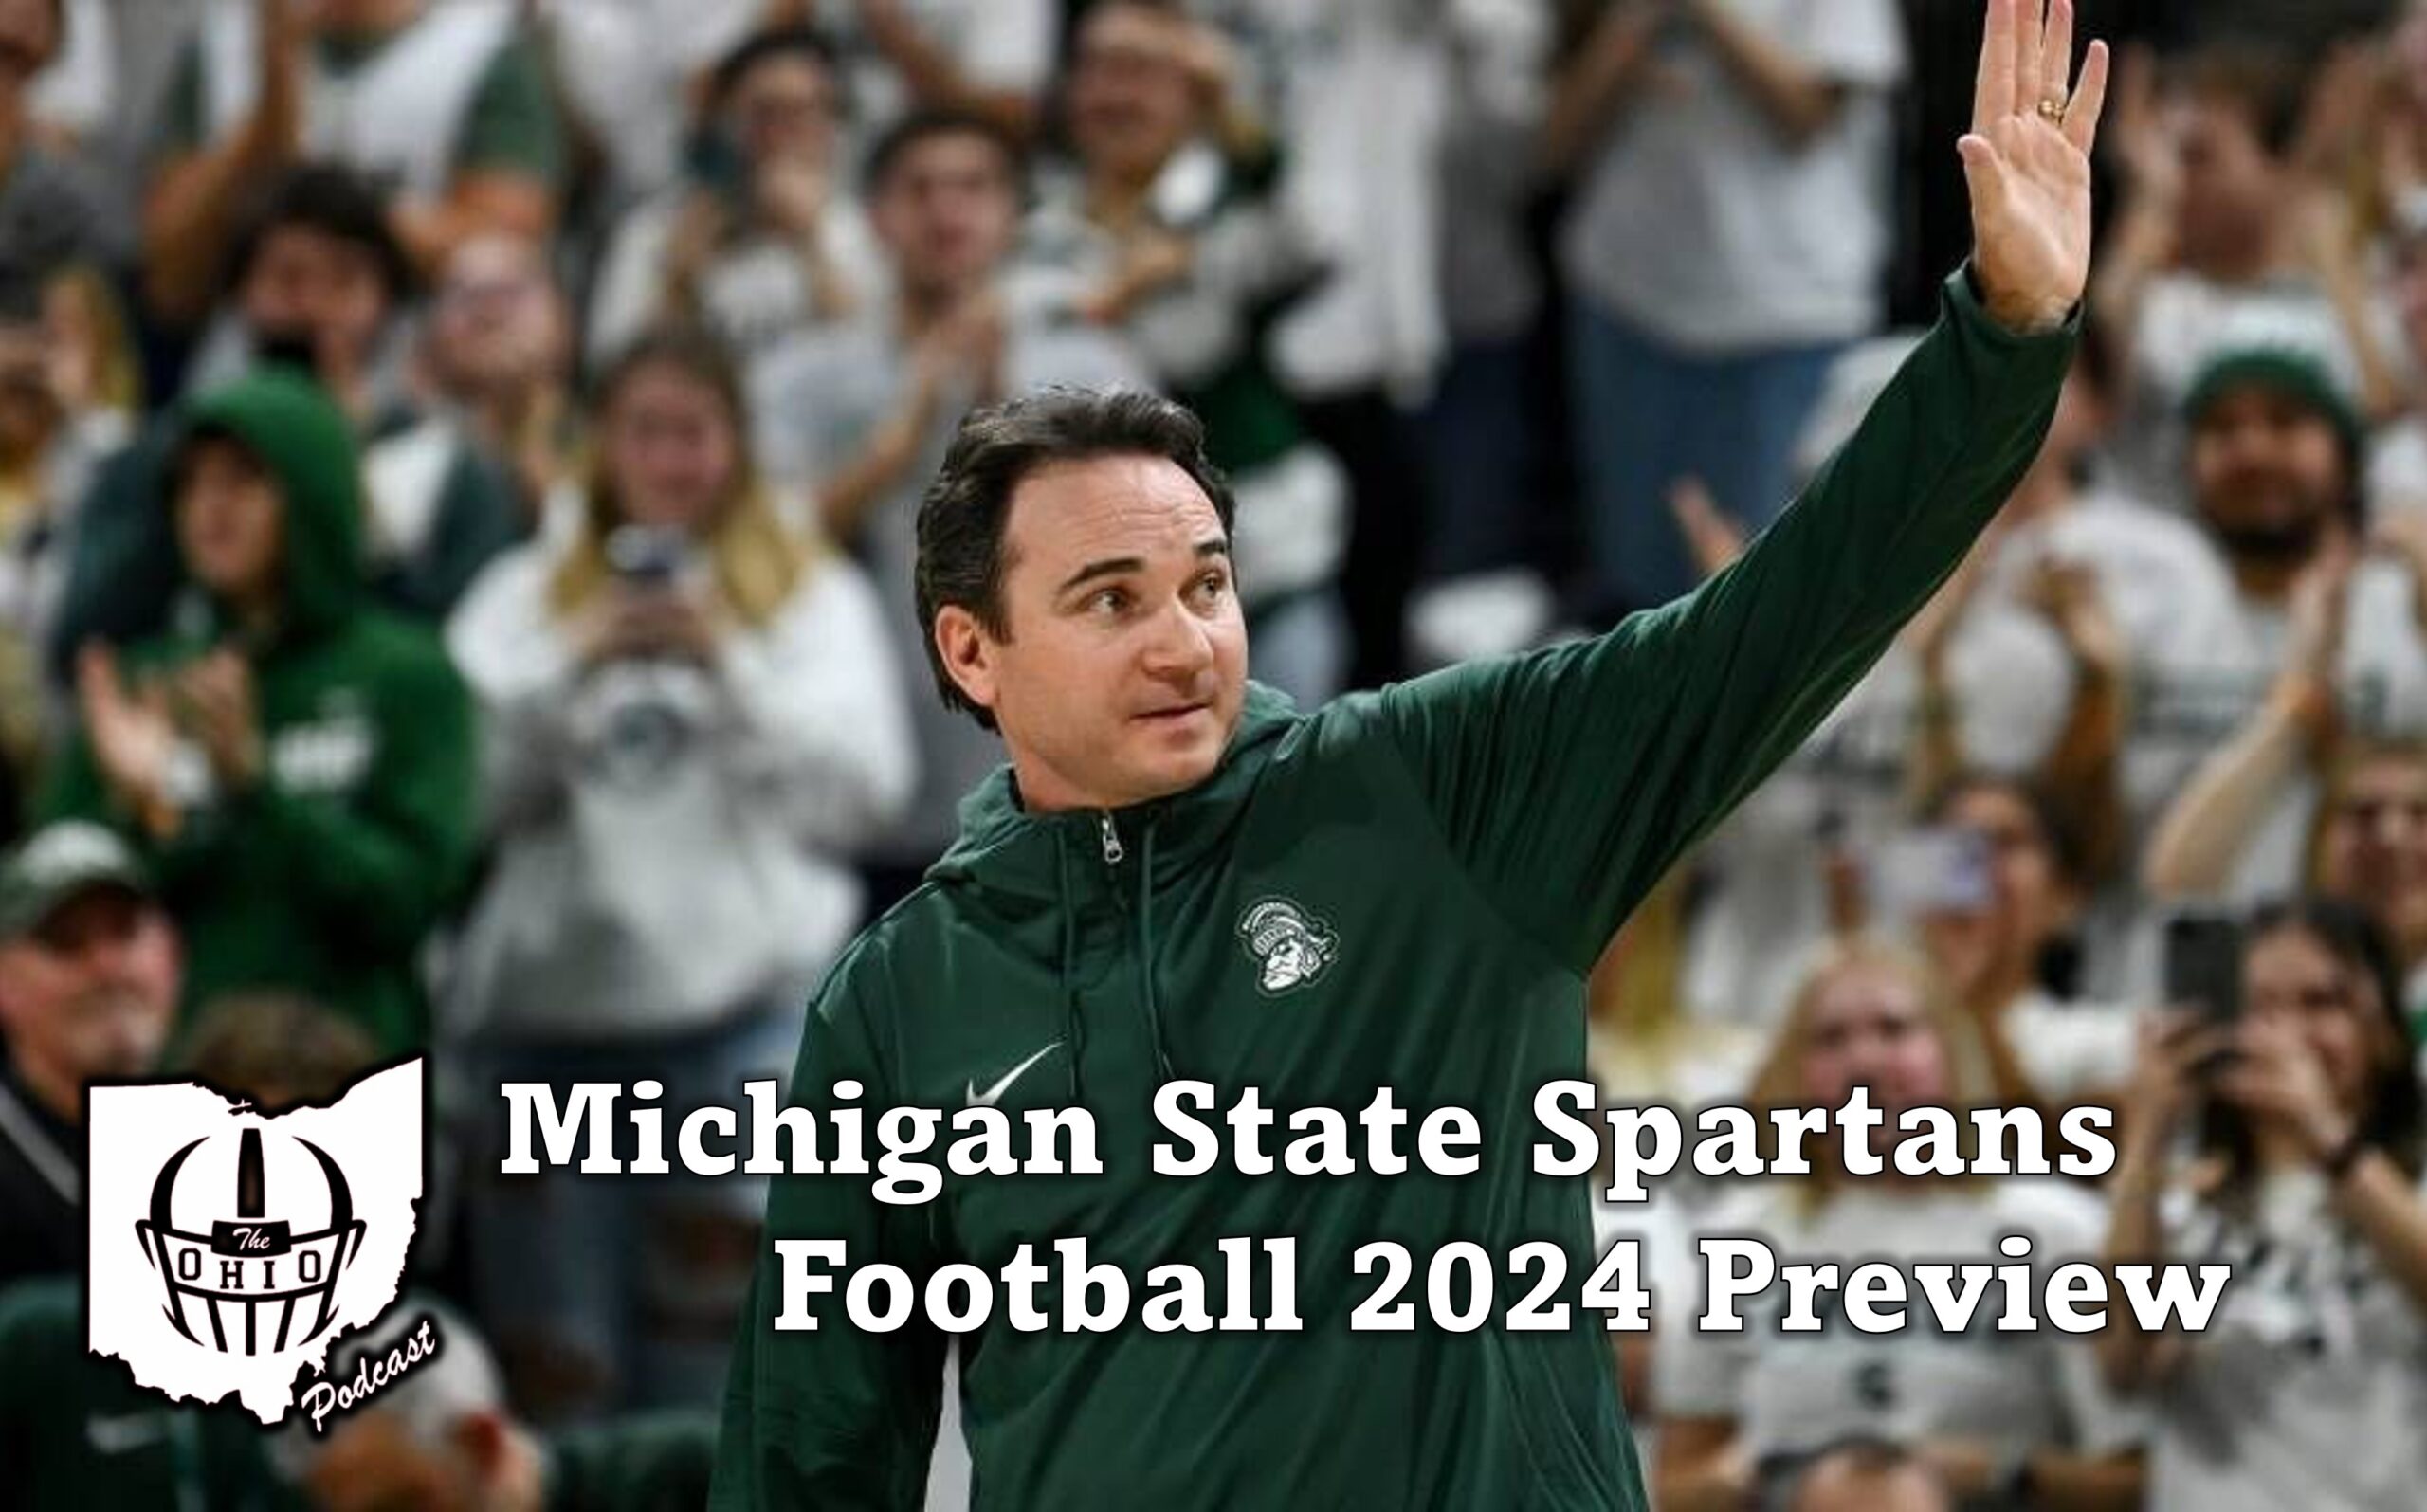 Previewing the Michigan State Spartans Football Team